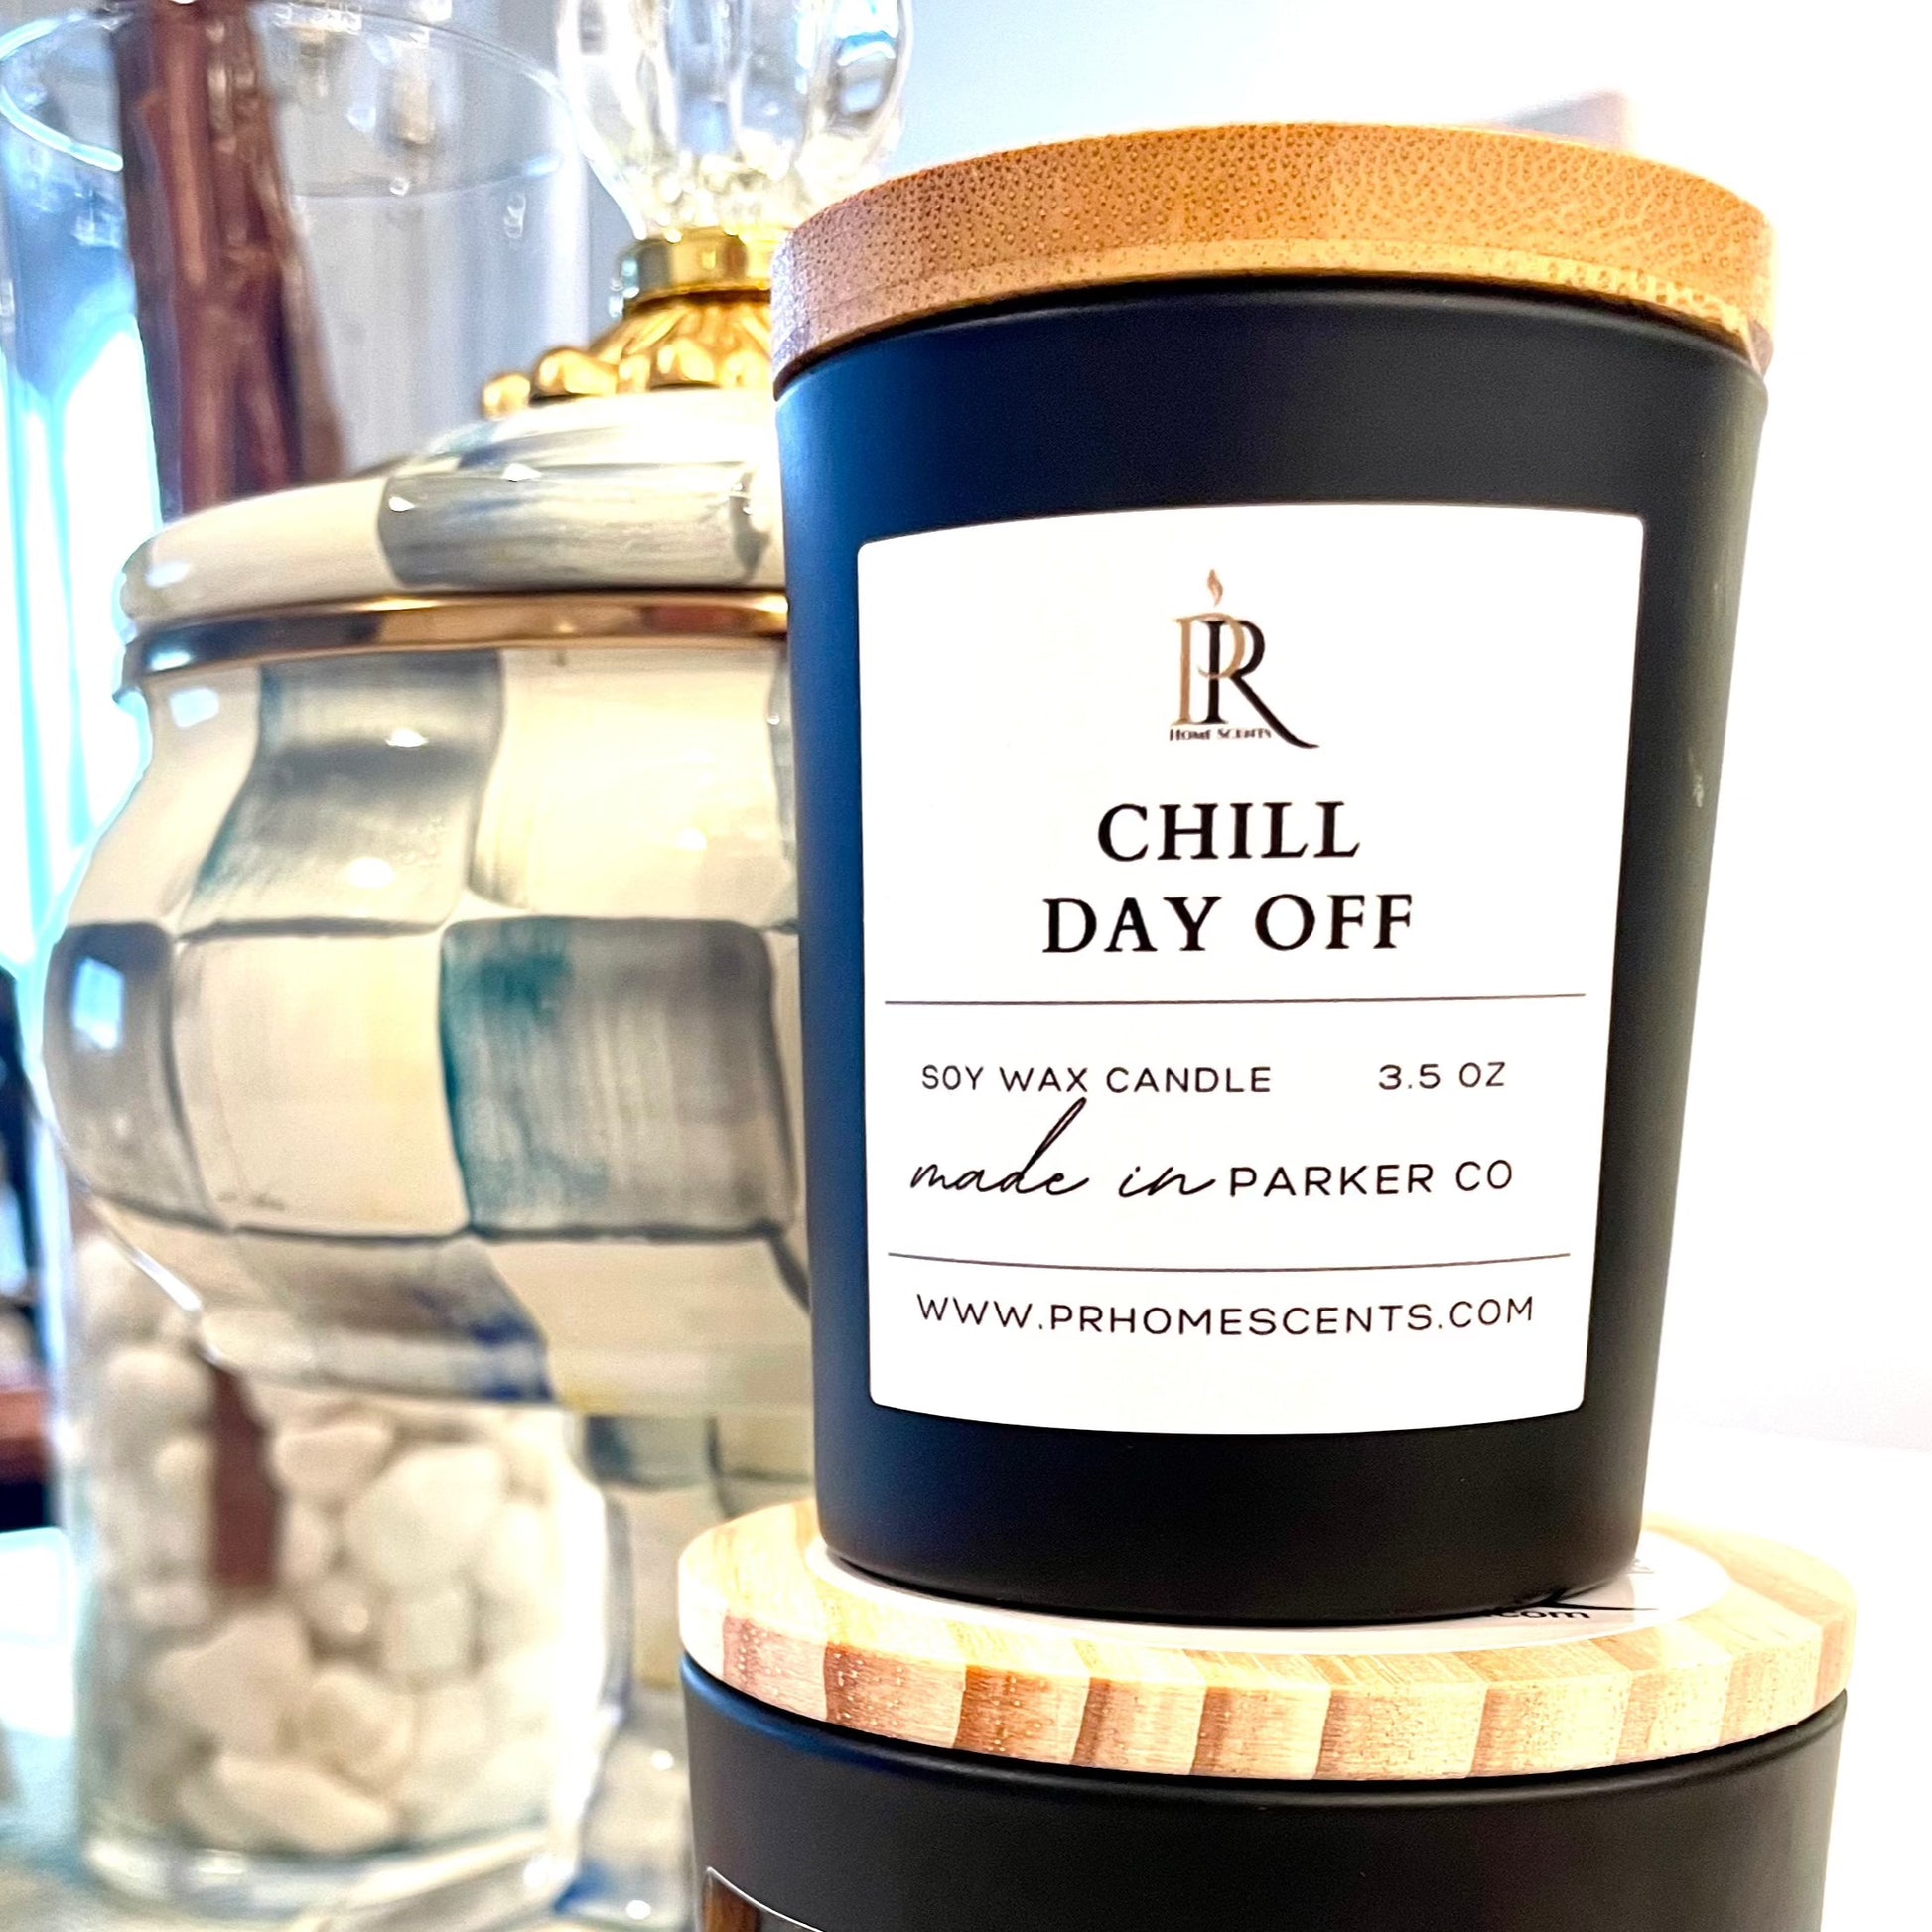 Indulge in serenity with Chill Day Off candles, available in 8oz and 3.5oz sizes. Infused with the calming blend of Lavender Vanilla and Amber, these candles create a tranquil atmosphere, perfect for unwinding after a long day. Embrace relaxation with the soothing fragrance of Chill Day Off.